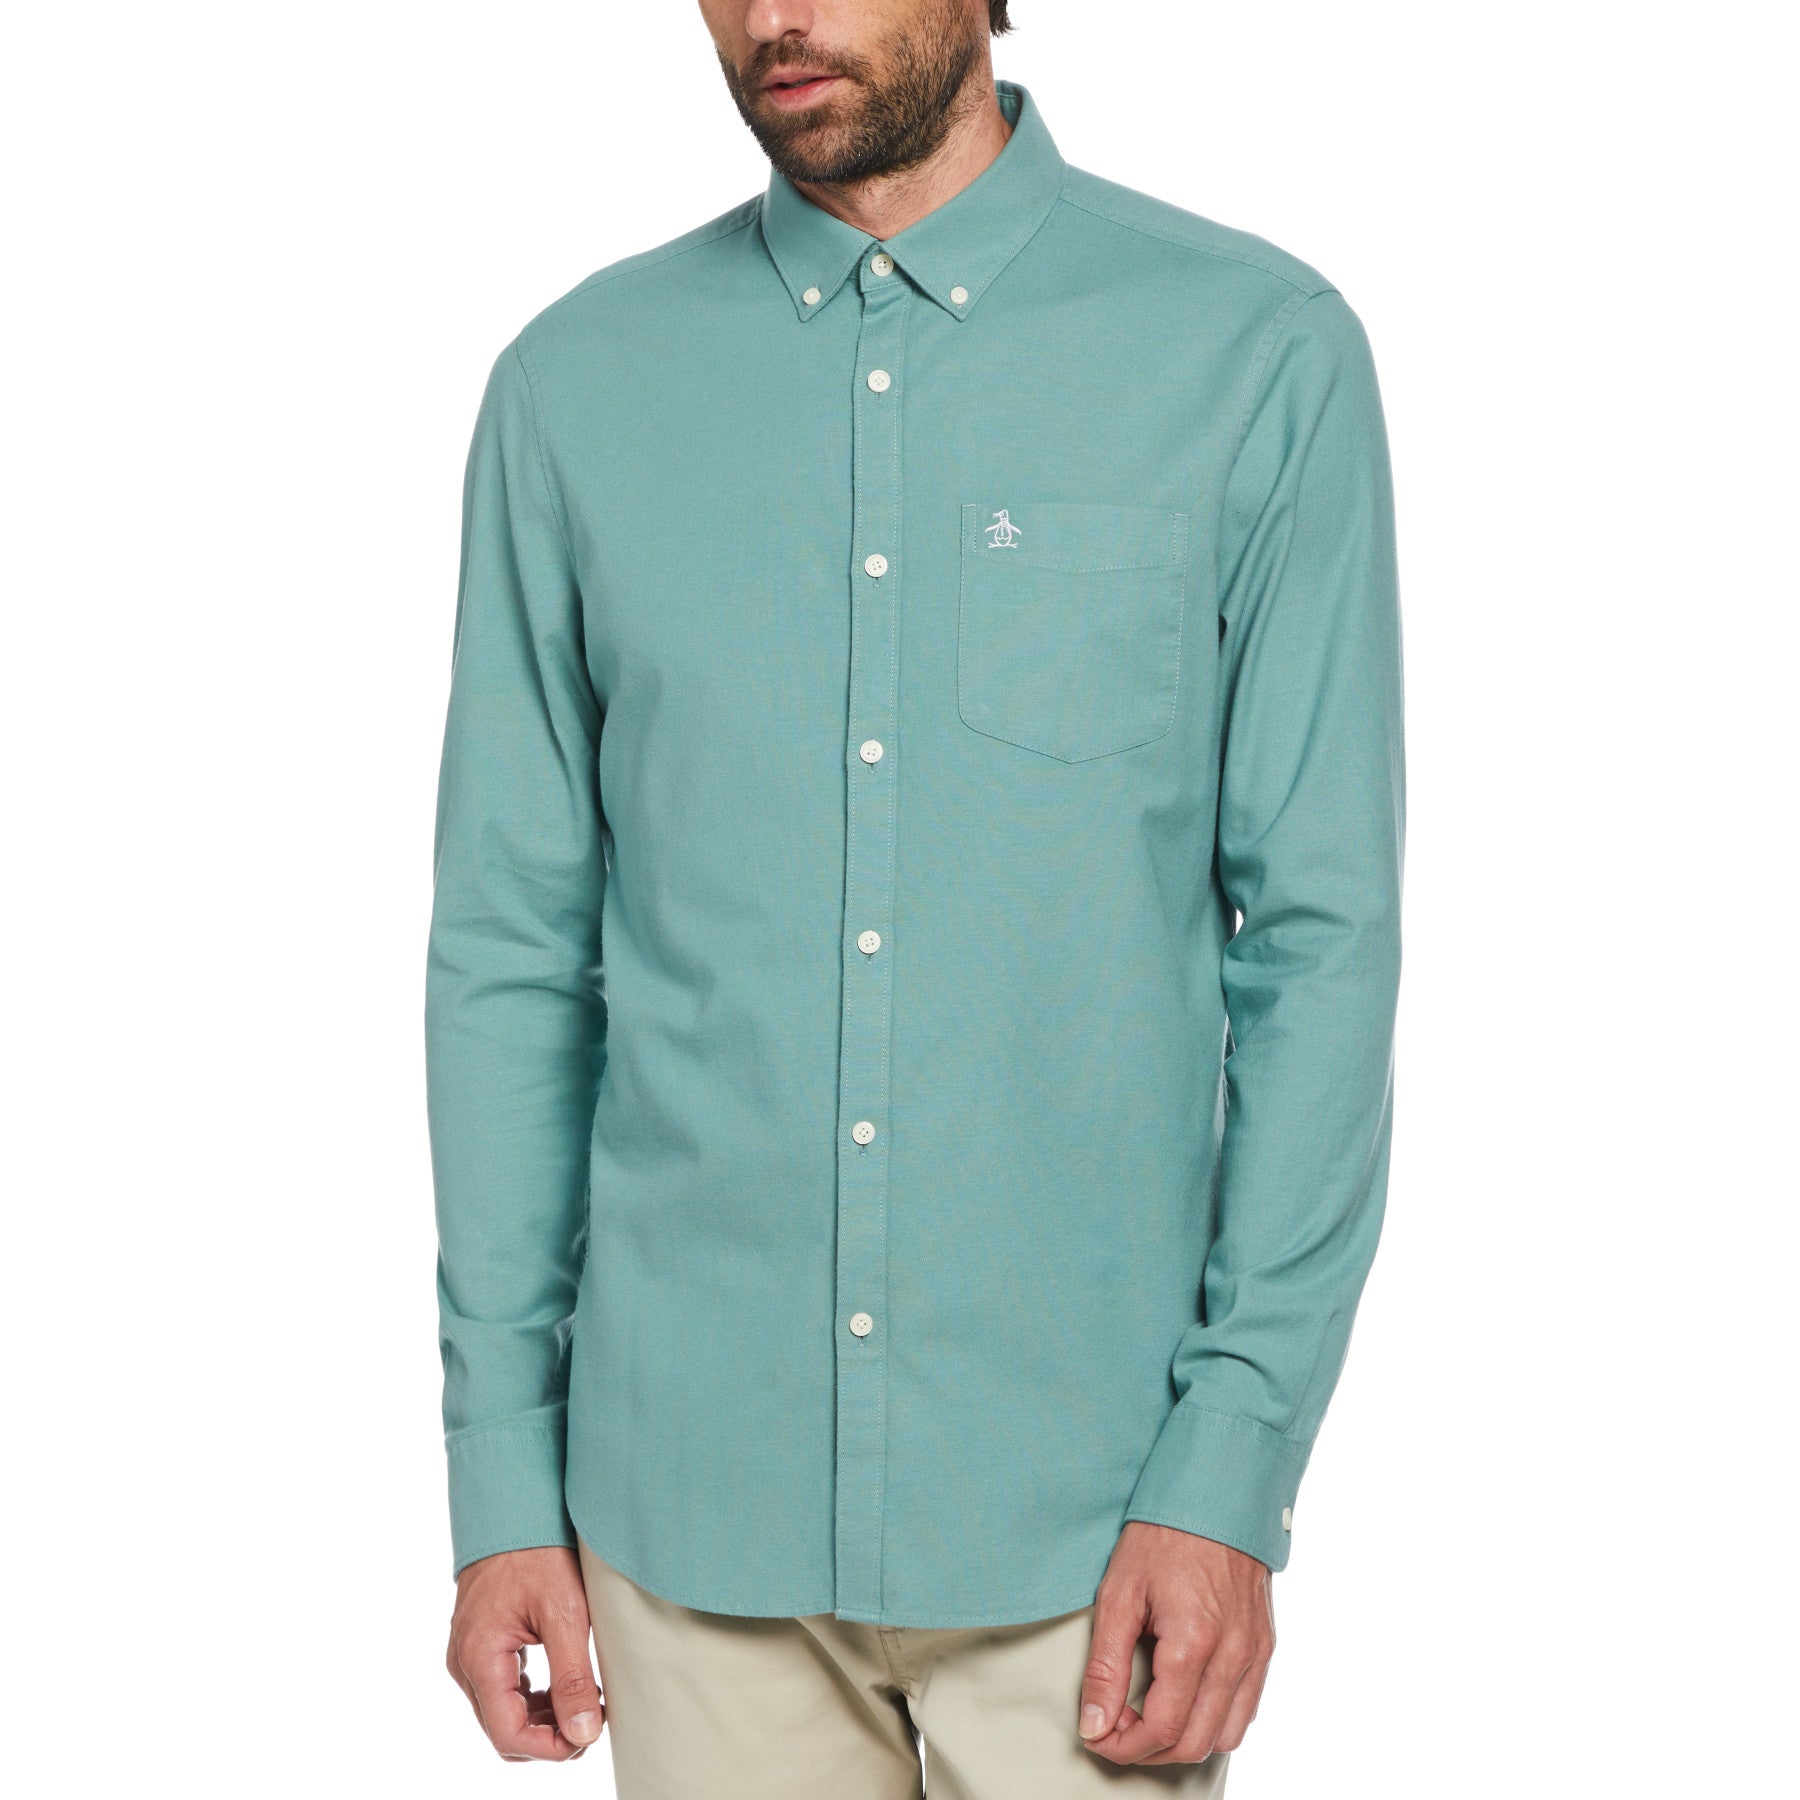 View Long Sleeve Stretch Oxford Shirt In Oil Blue information